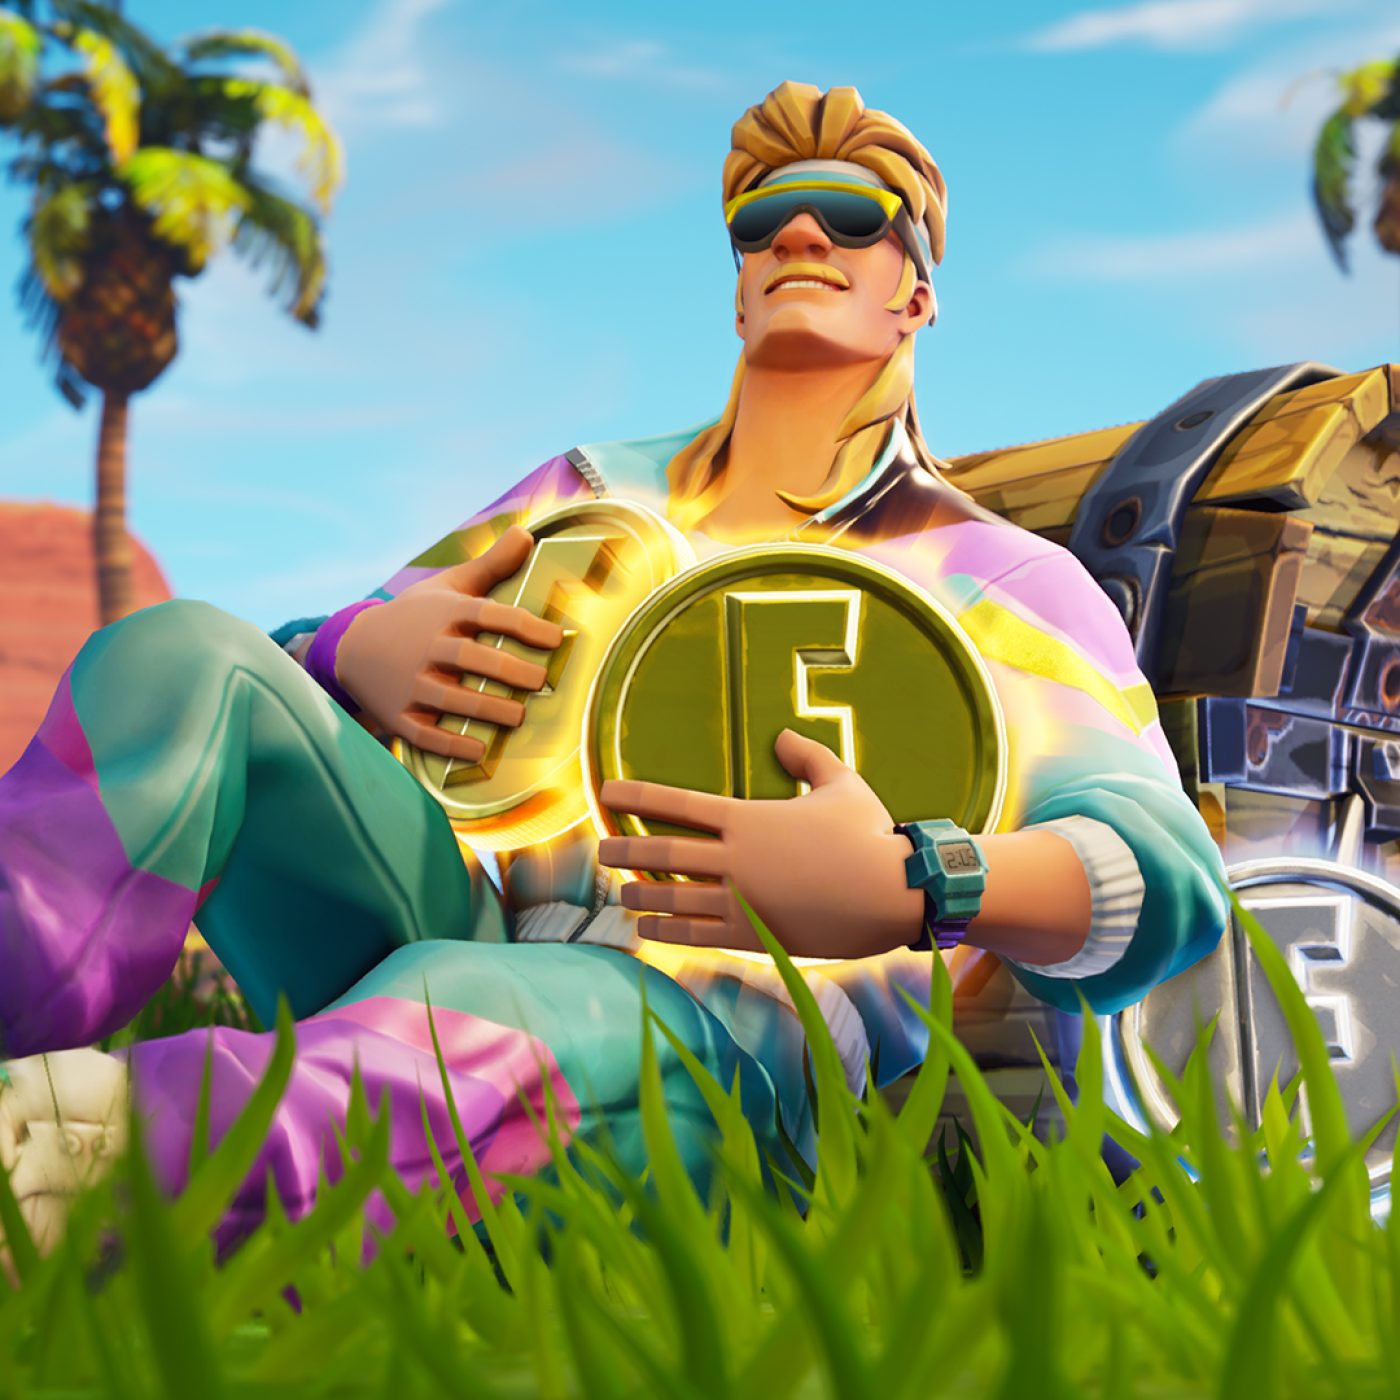 Apple Extends Fortnite's 'Sign-in with Apple' But Epic Games Still